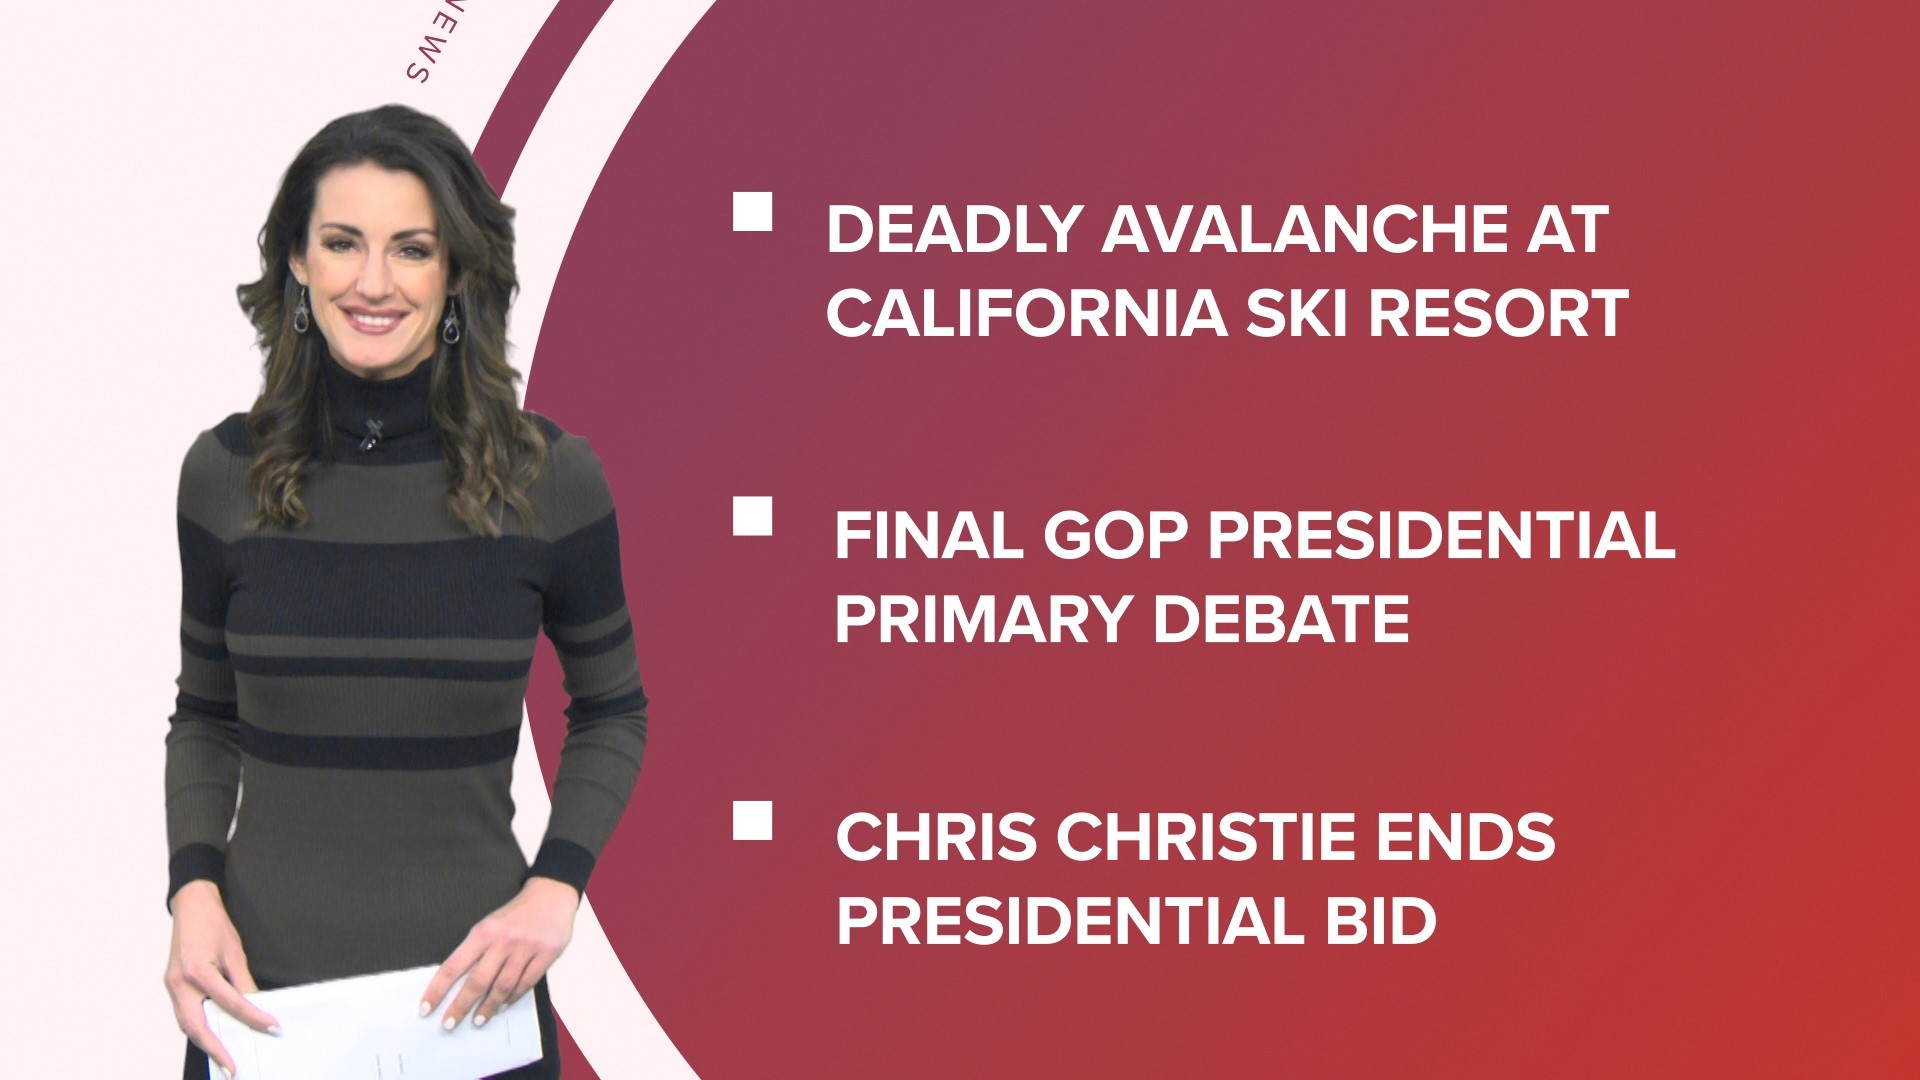 A look at what is happening in the news from a deadly avalanche at a California ski resort to the final GOP debate ahead of the Iowa caucuses and more.